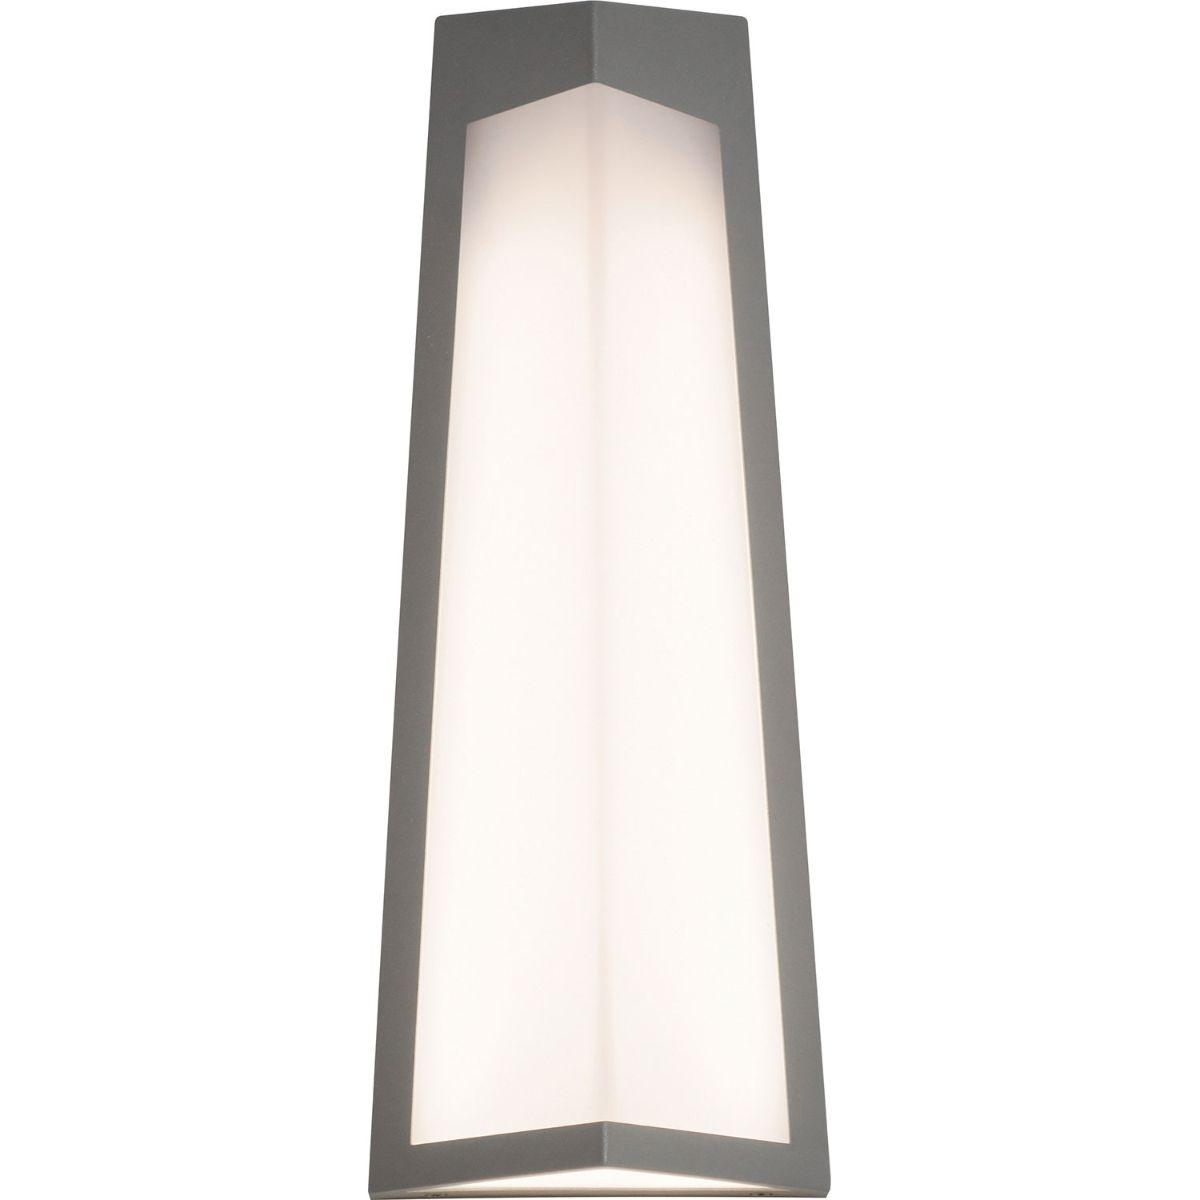 Pasadena 12 in. LED Outdoor Wall Sconce